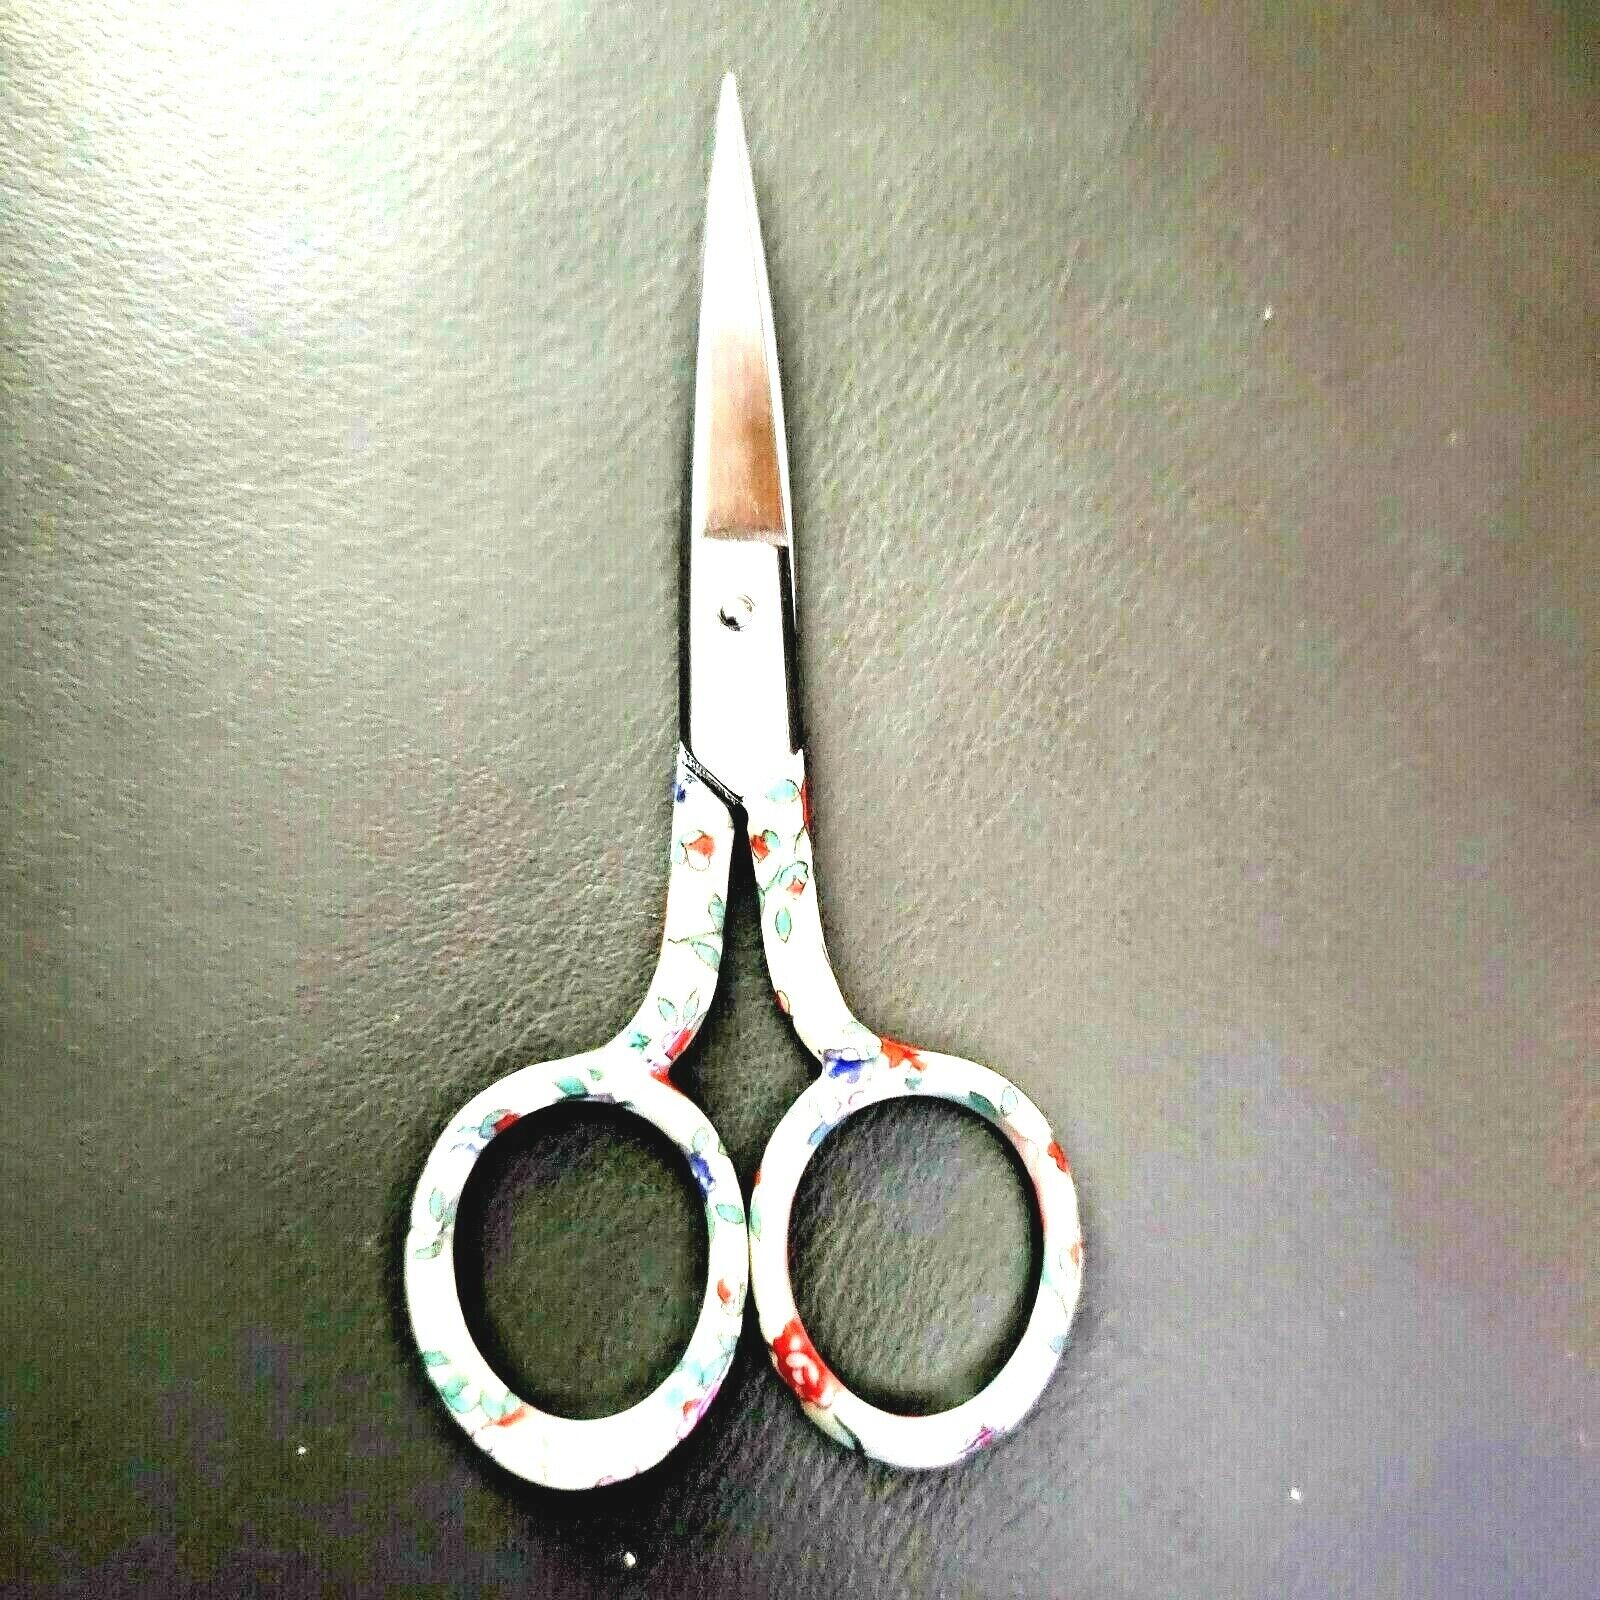 Rare Gingher Designer Series,LINDSAY 4" Embroidery Scissors 2004 Limited Edition